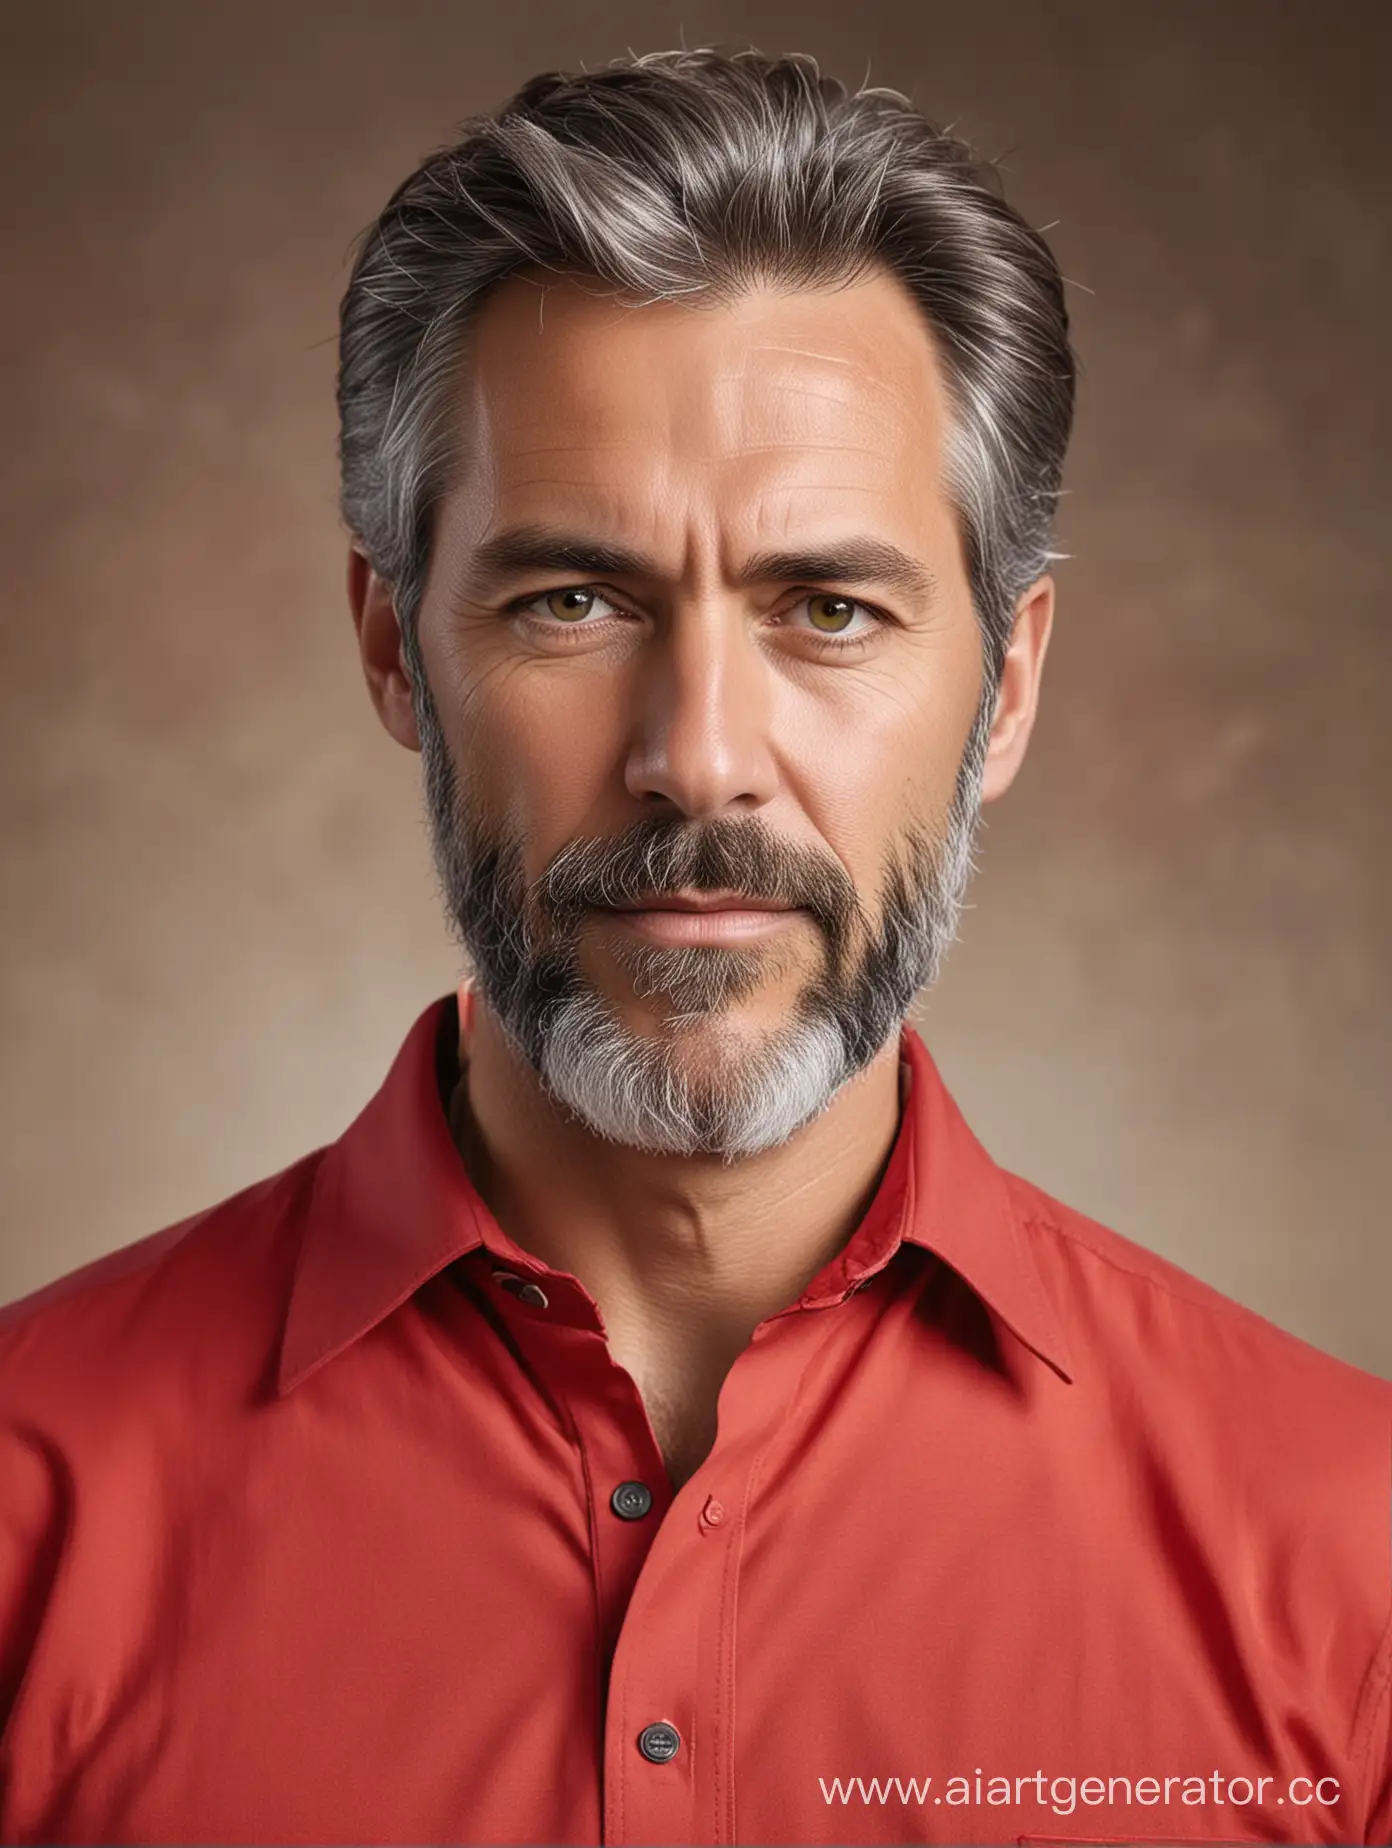 Confident-MiddleAged-Man-in-Bright-Red-Shirt-Charismatic-Portrait